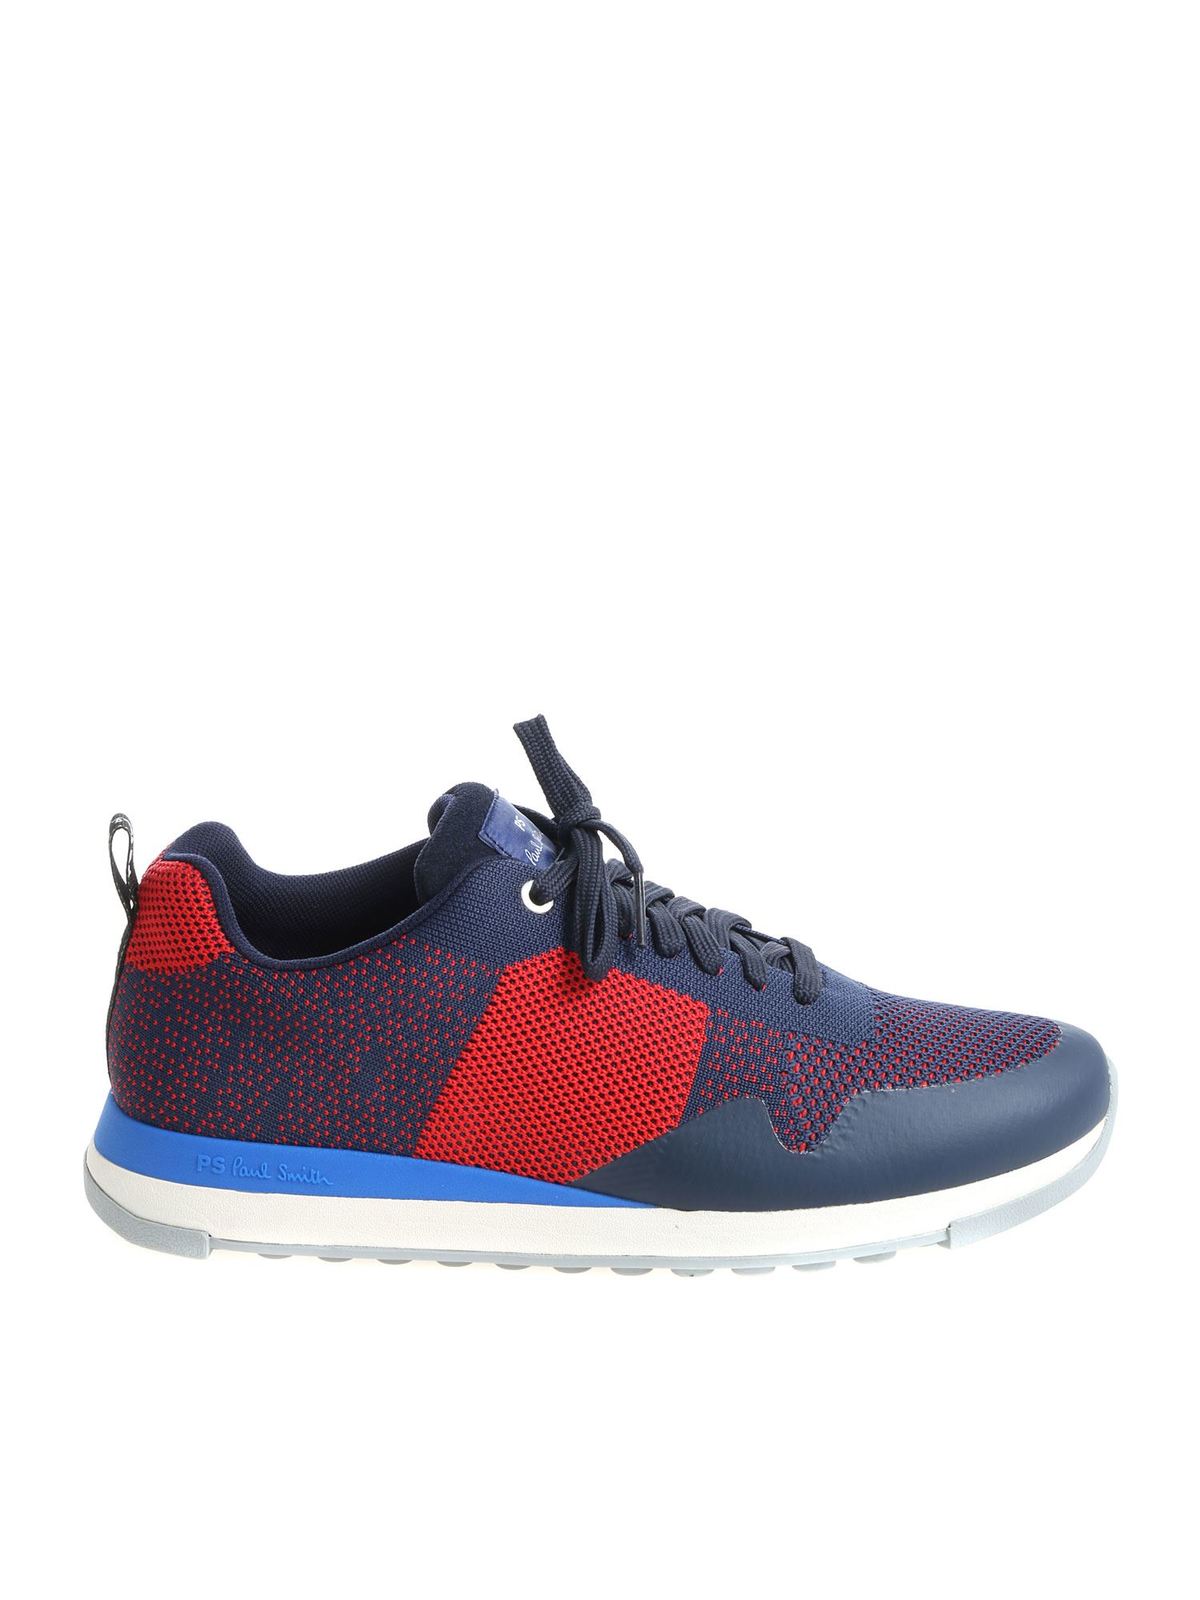 paul smith rappid trainers